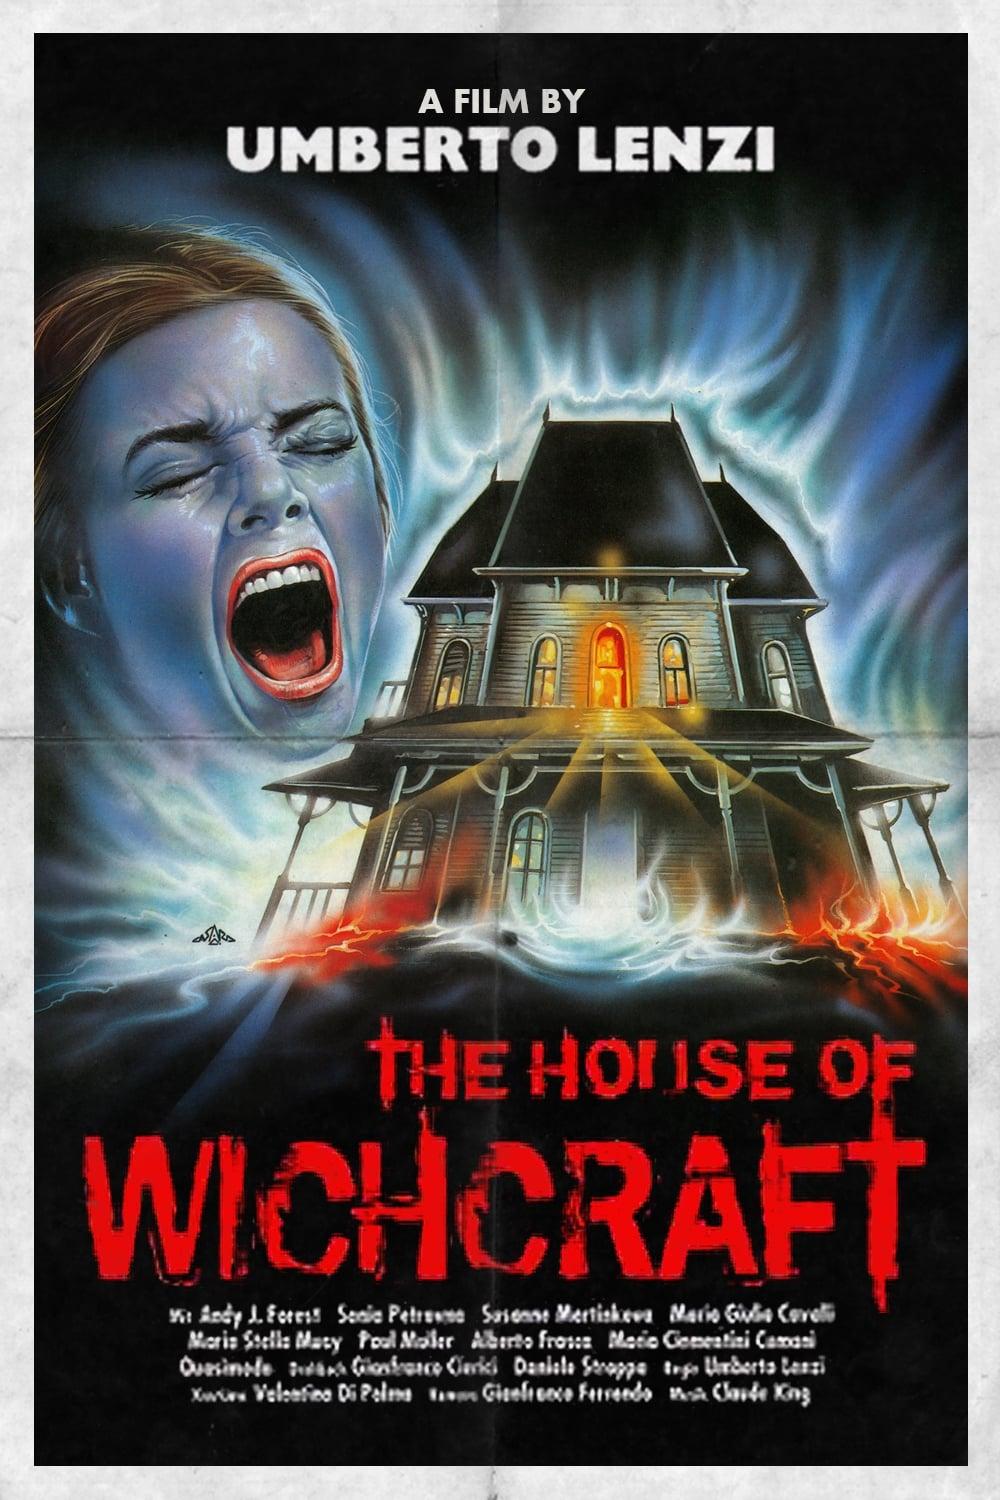 The House of Witchcraft poster